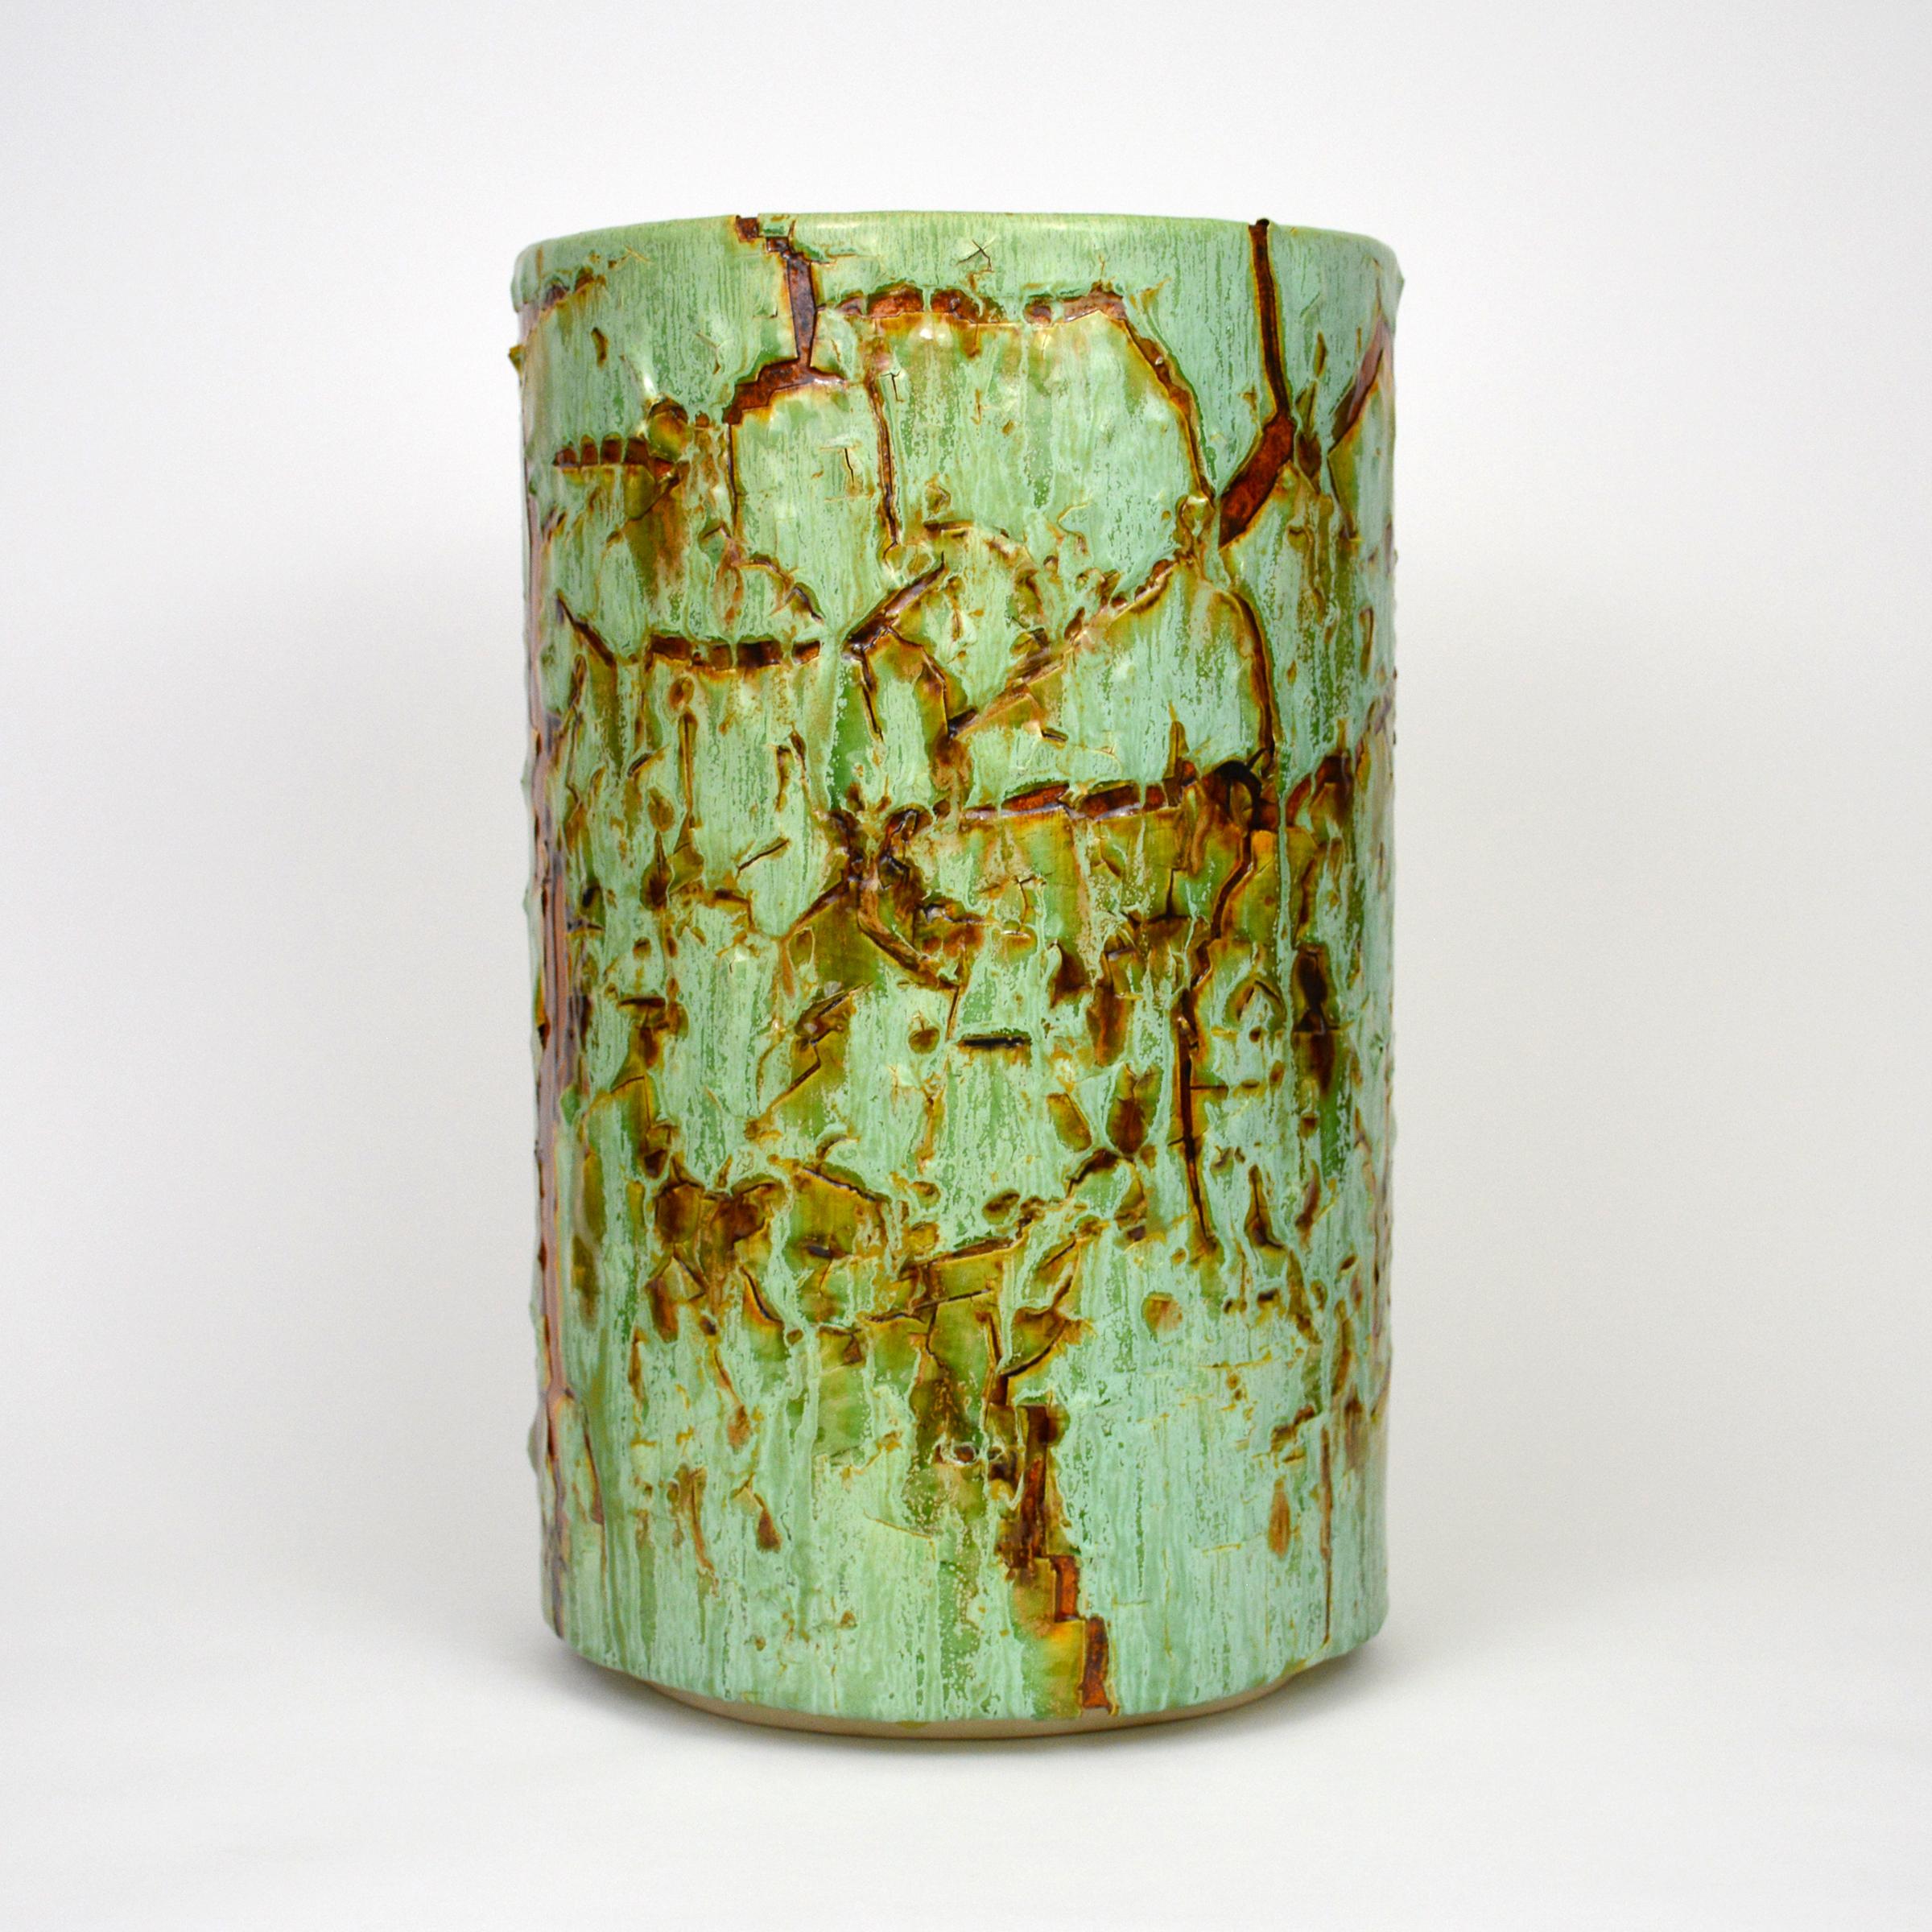 Glazed ceramic cylindrical sculpture by William Edwards
Hand built earthenware vessel, fired multiple times to achieve a textured surface of random abstraction, in hues of green with amber gloss glaze breaking through.

William received his BFA